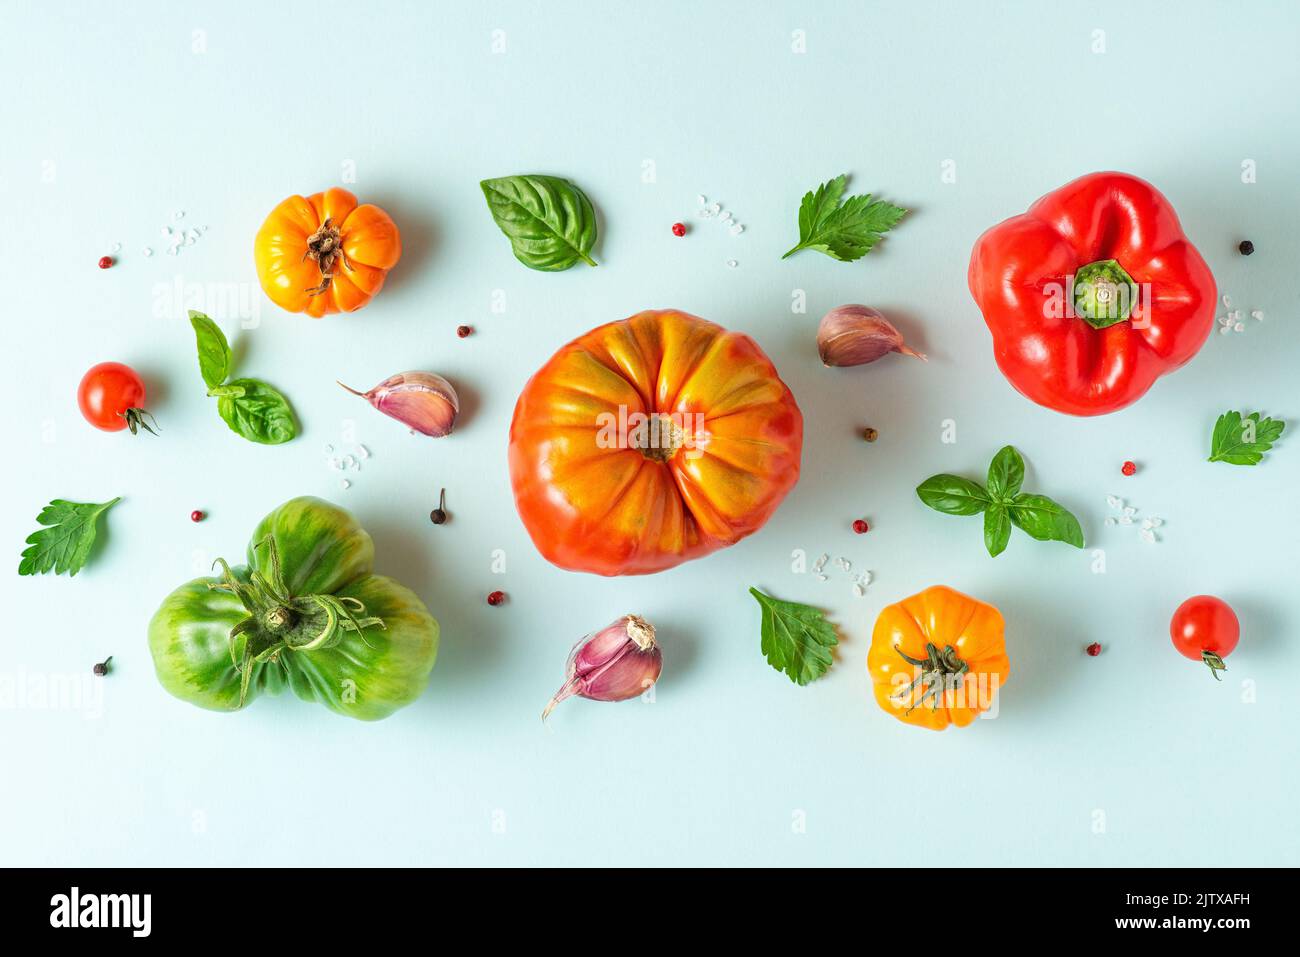 Food composition. Tomatoes, basil, garlic and pepper on pastel blue background. Flat lay. Top view. Vegetables pattern Stock Photo